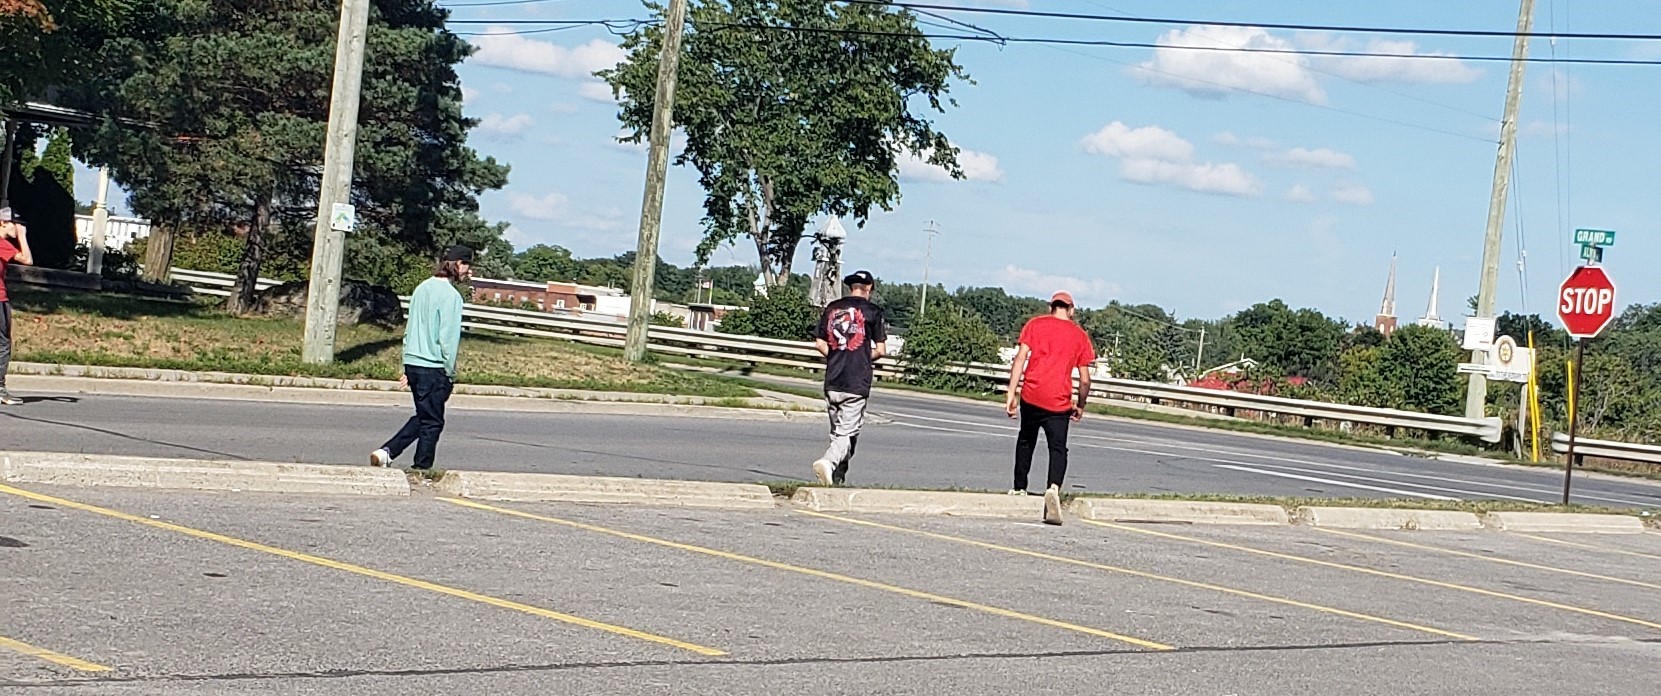 People walking towards a stop sign